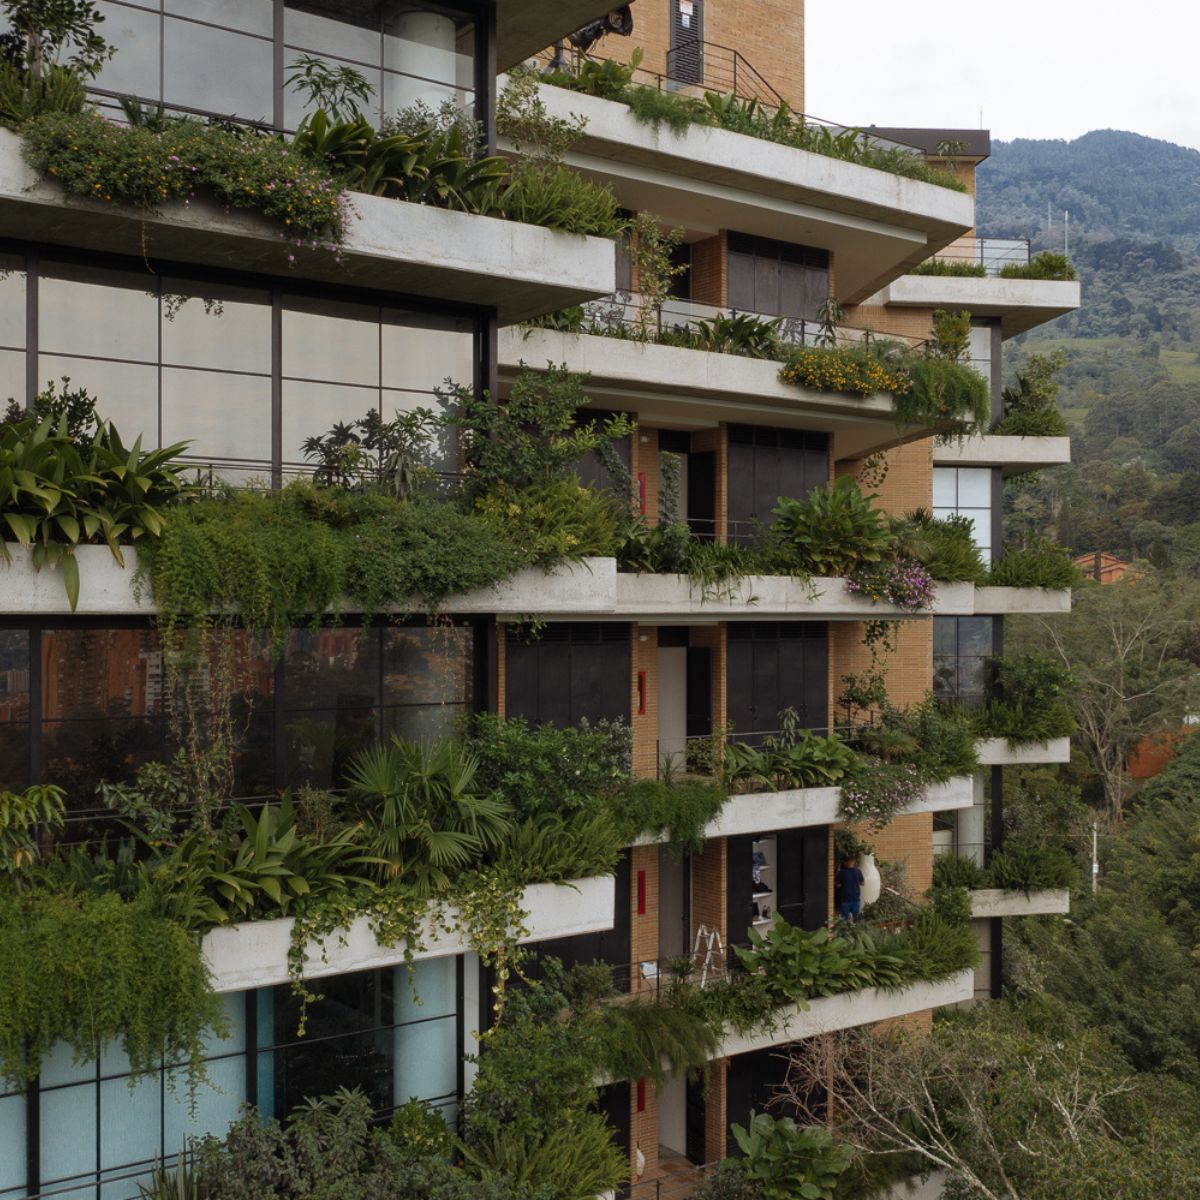 medellin-the-green-city-that-is-conquering-latin-america-featured